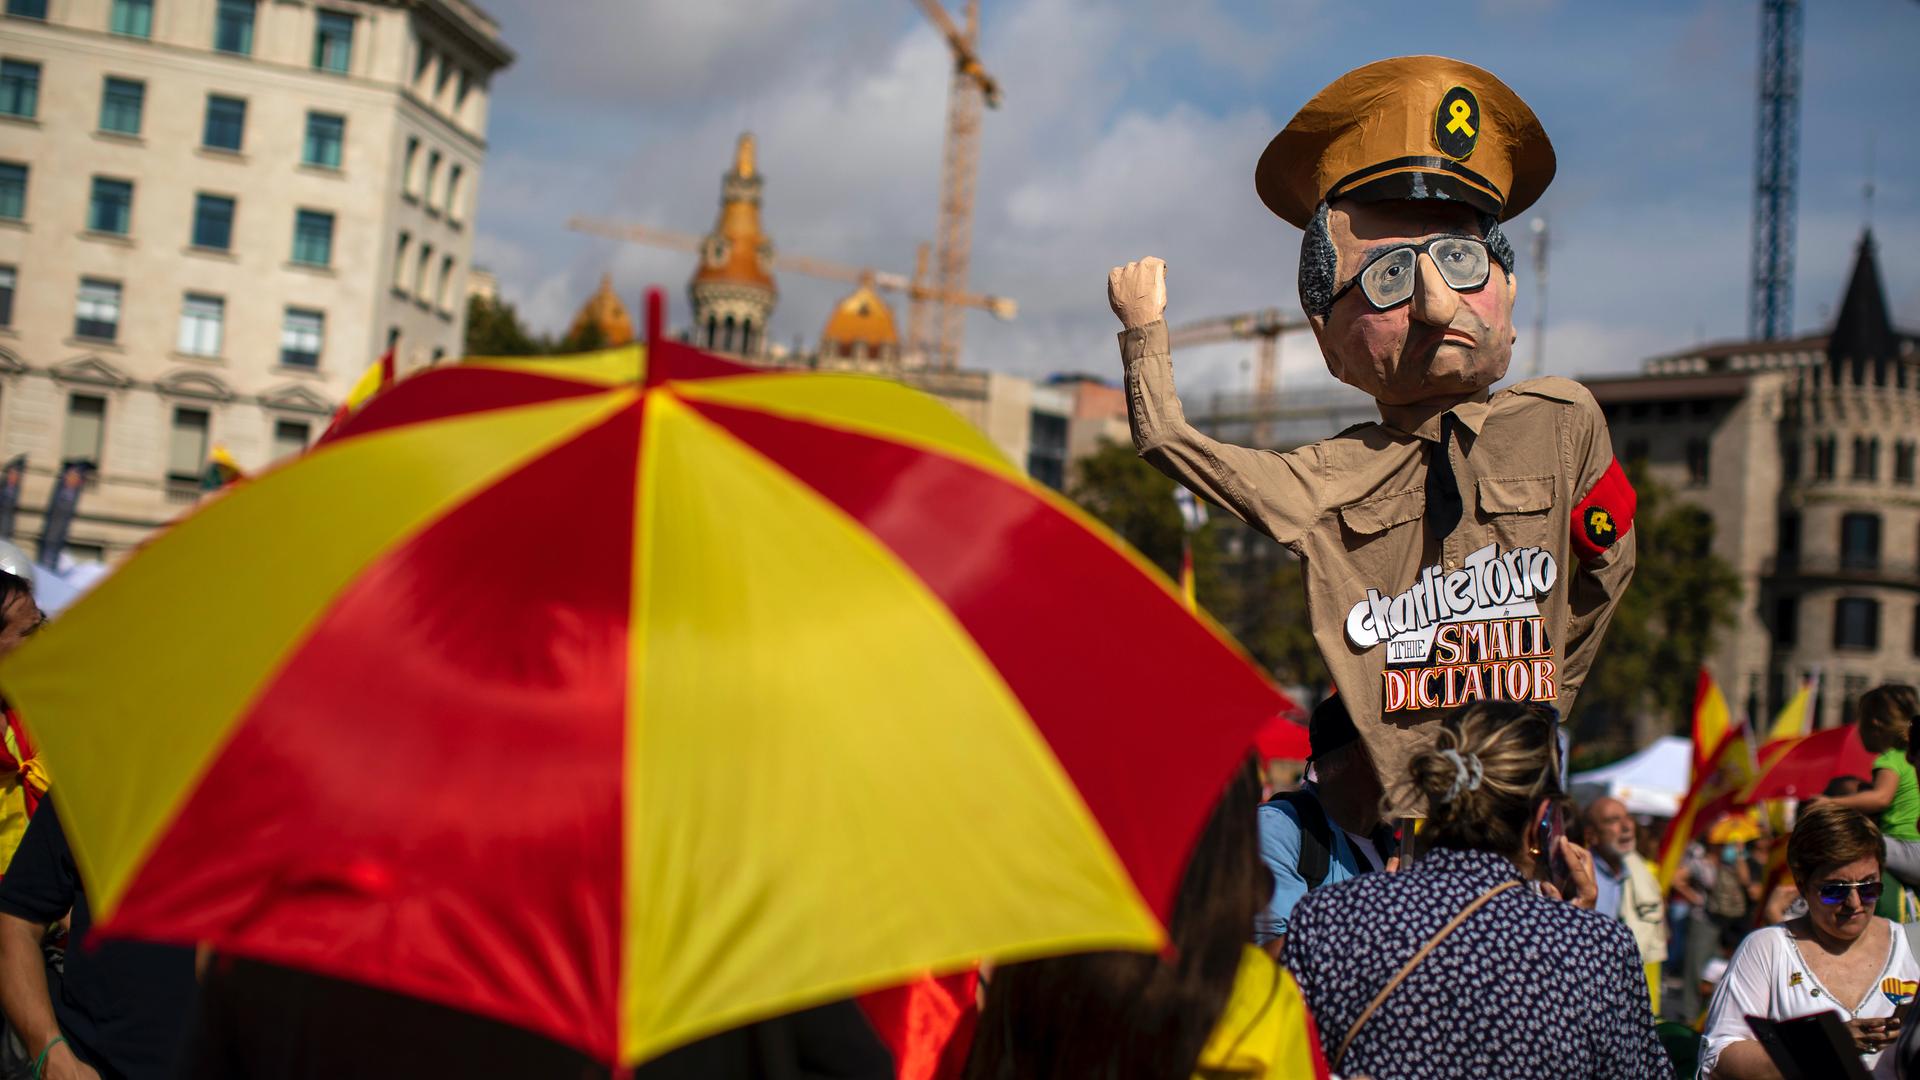 A demonstrator holds a paper doll representing regional Catalan President Quim Torra, as they celebrate a holiday known as "Dia de la Hispanidad" or Spain's National Day in Barcelona, Spain, Oct. 12, 2019. Spain commemorates Christopher Columbus' arrival 